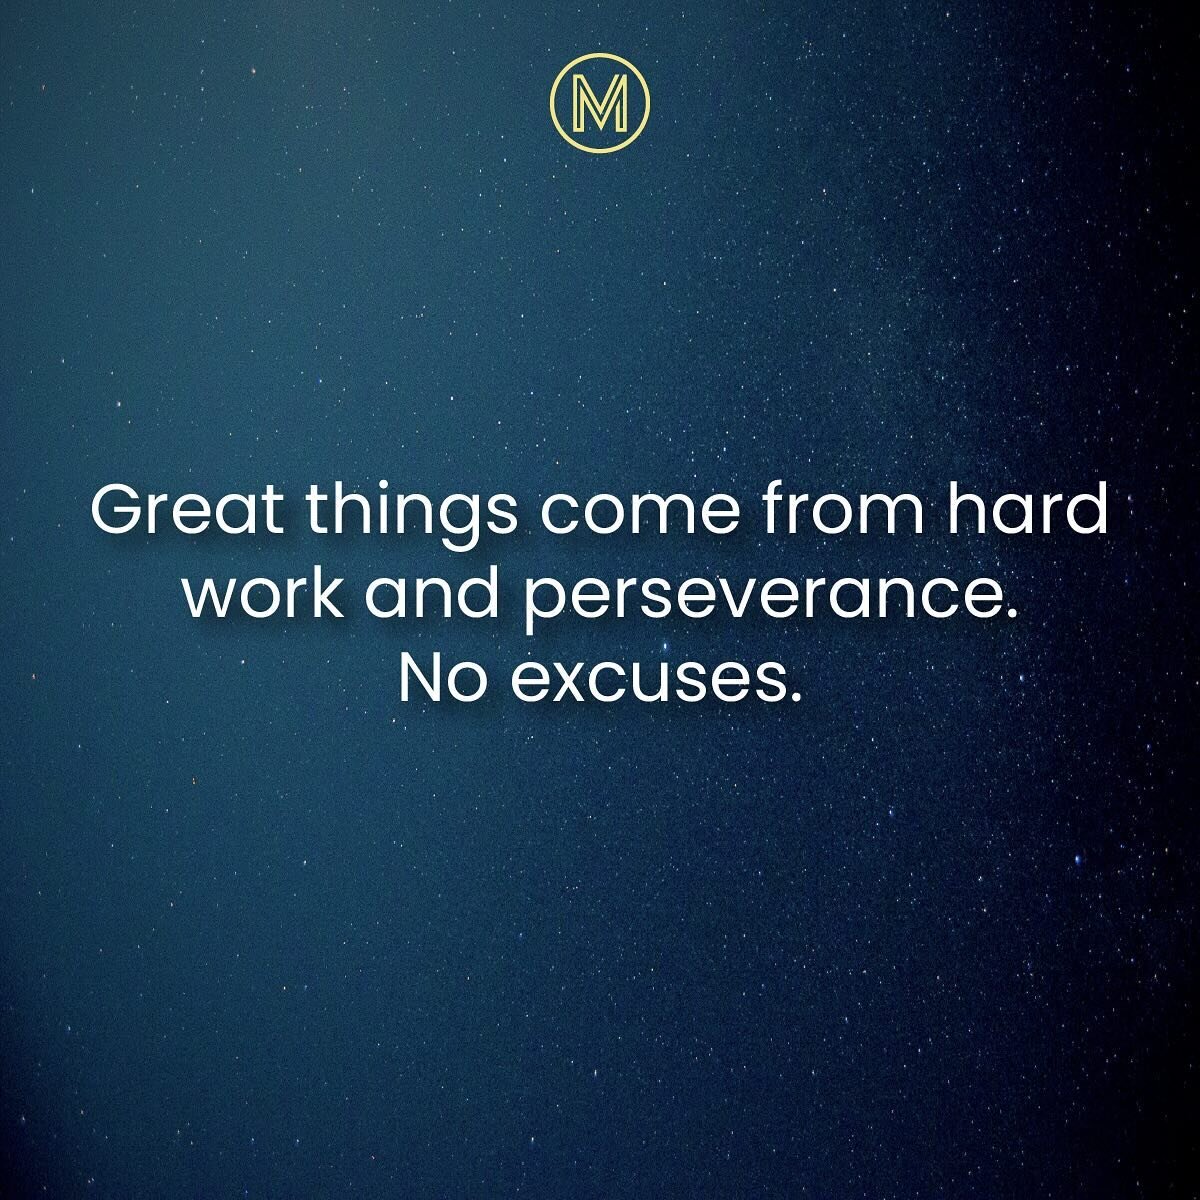 Great things come from hard work and perseverance.
No excuses. #kobebryant